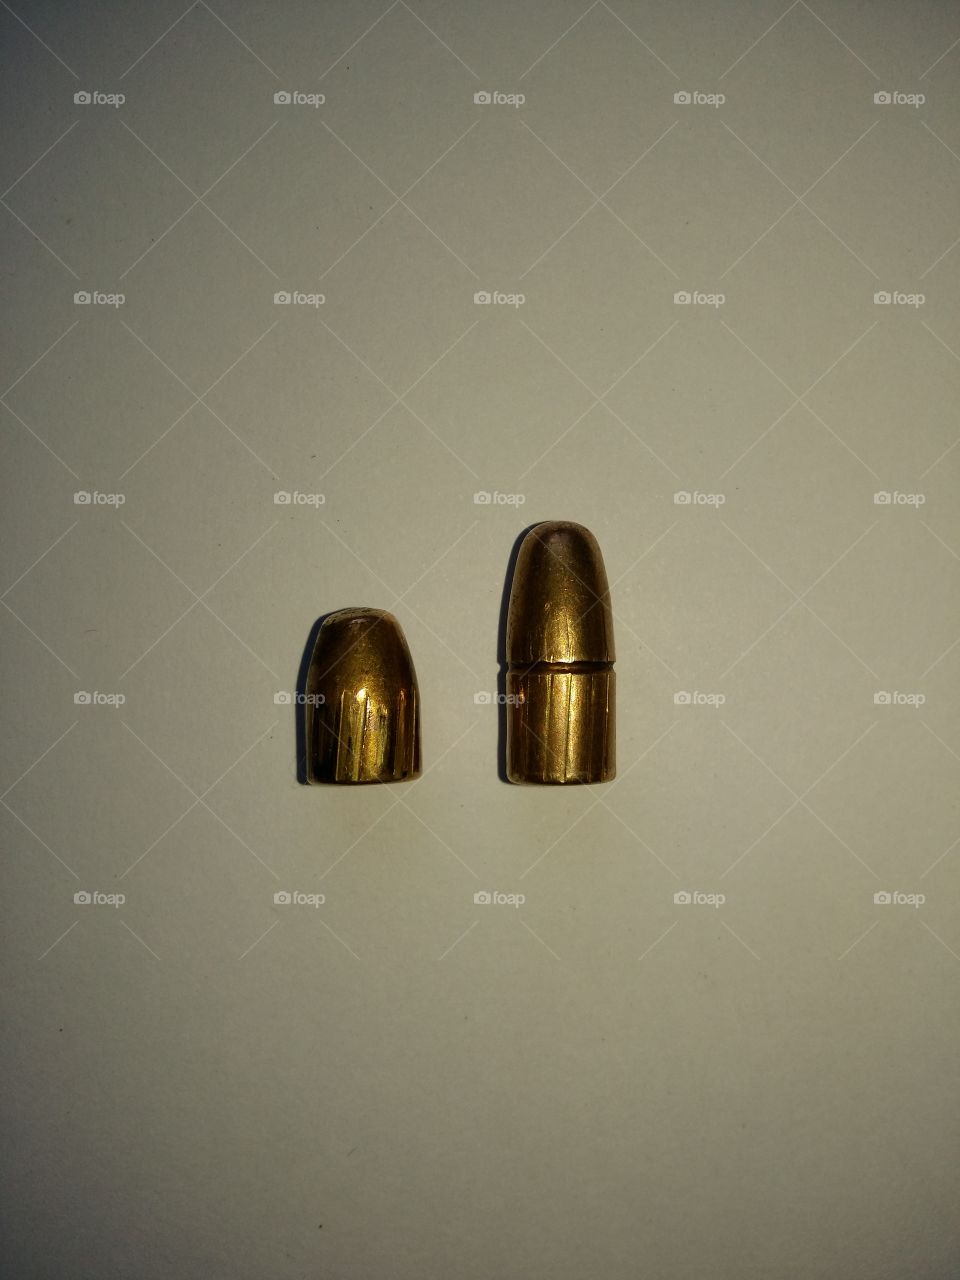 Bullets on white backgrounds